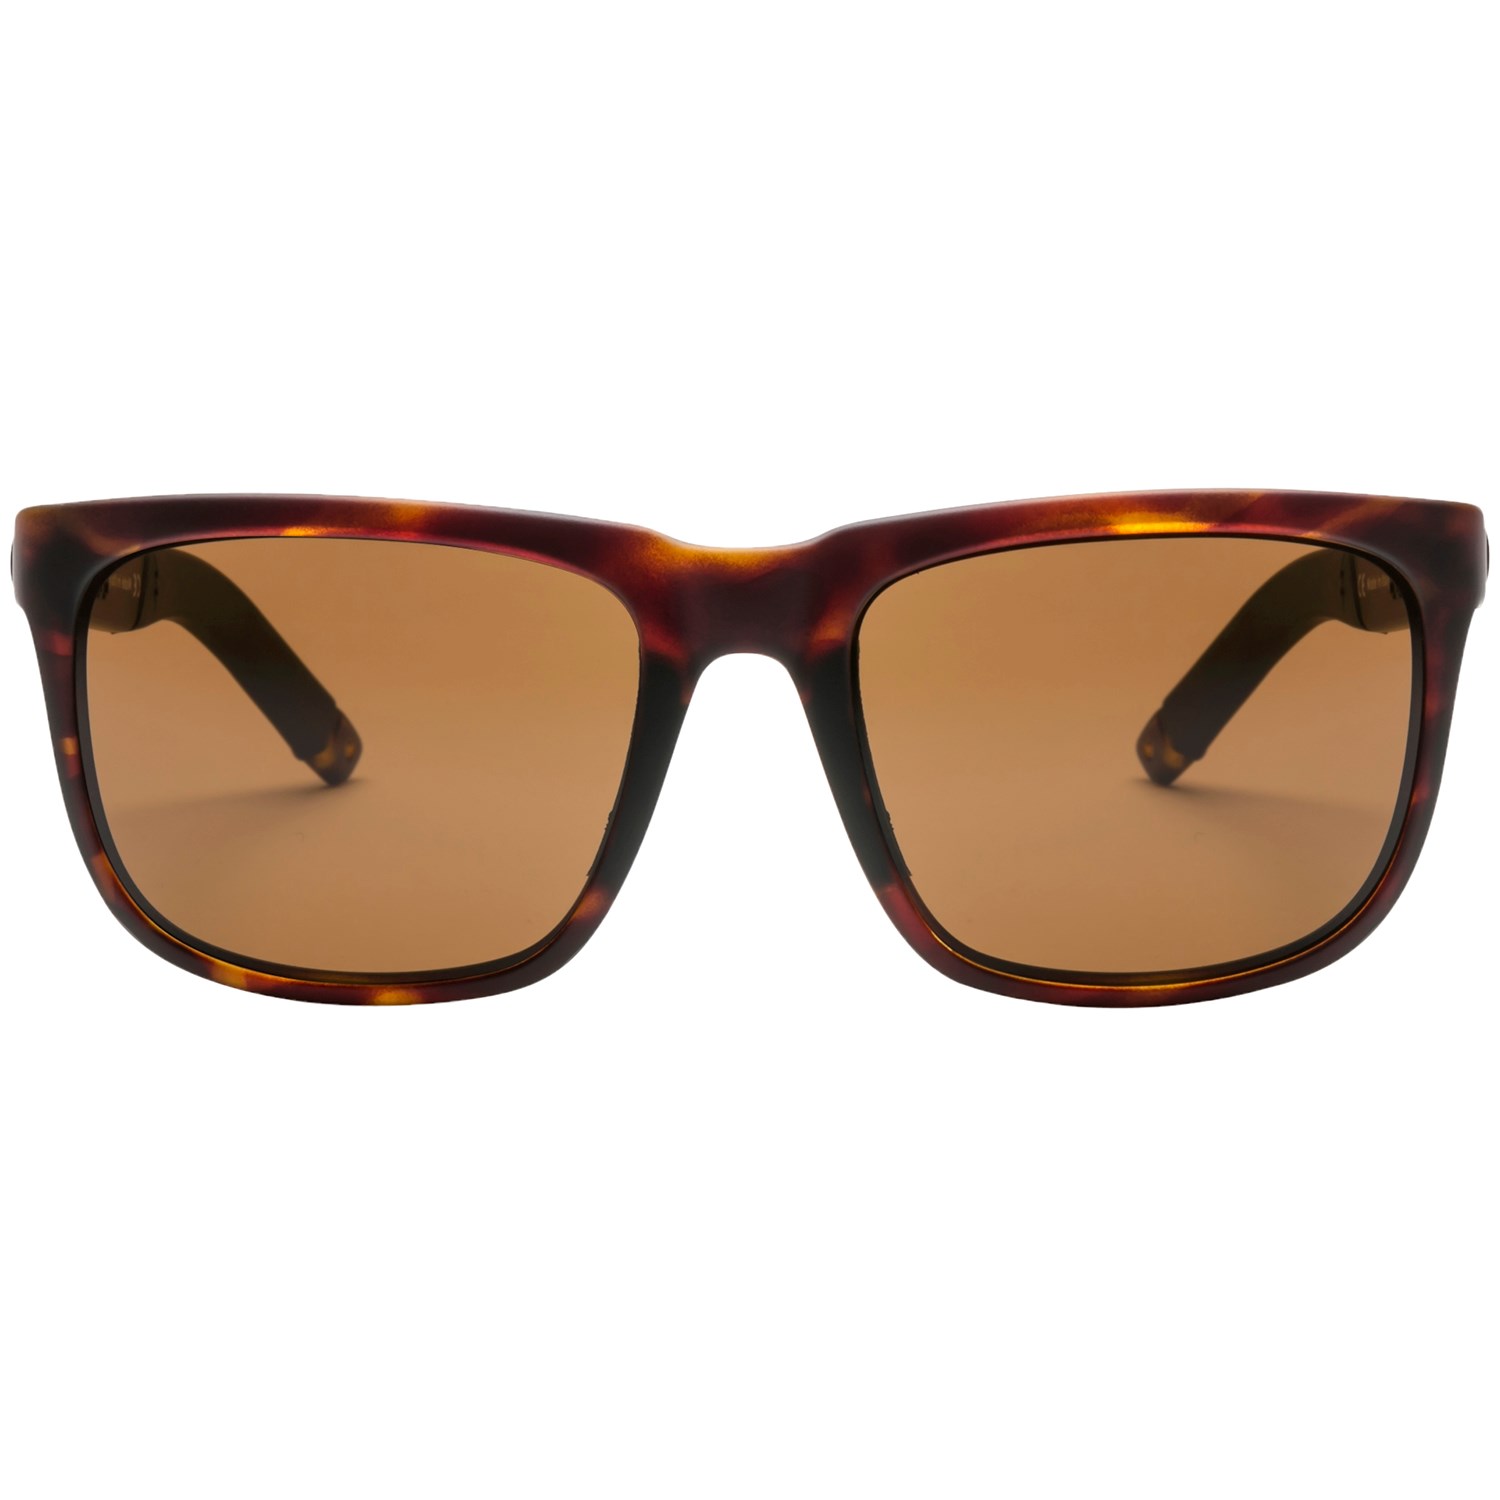 Electric Knoxville Sunglasses Matte Tortoise Shell with Melanin Bronze Lens